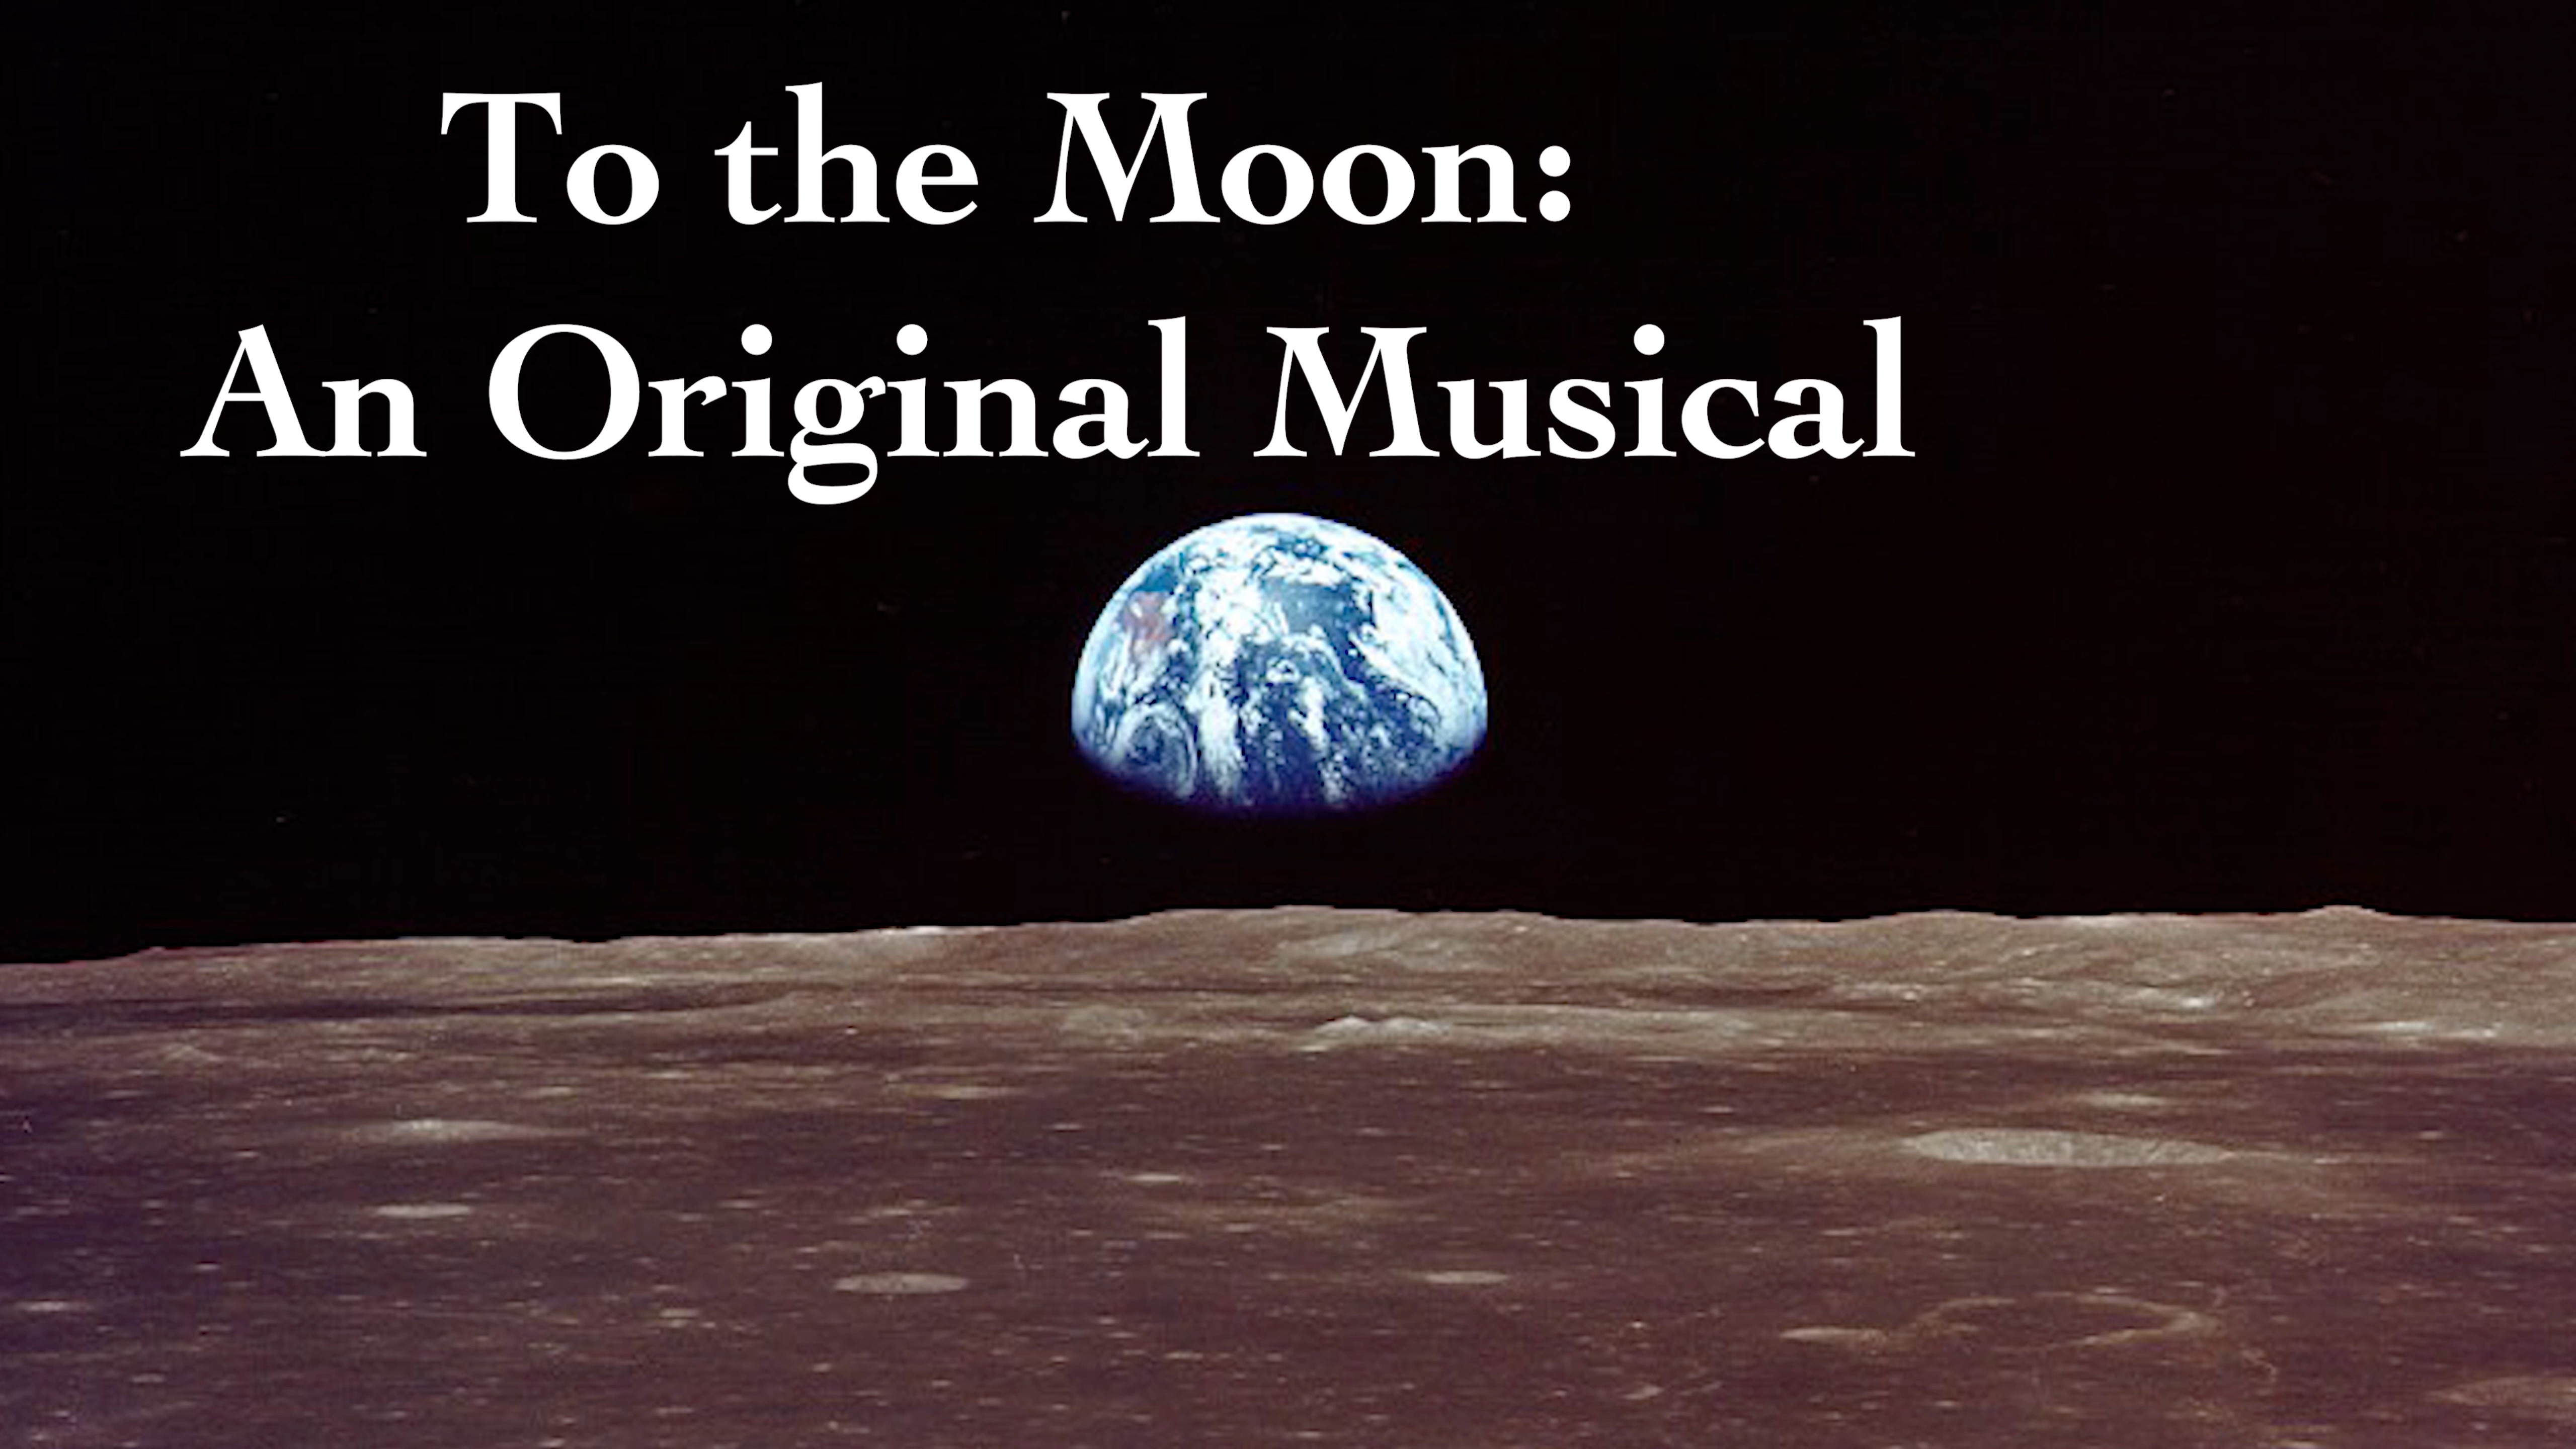 TO THE MOON MUSICAL